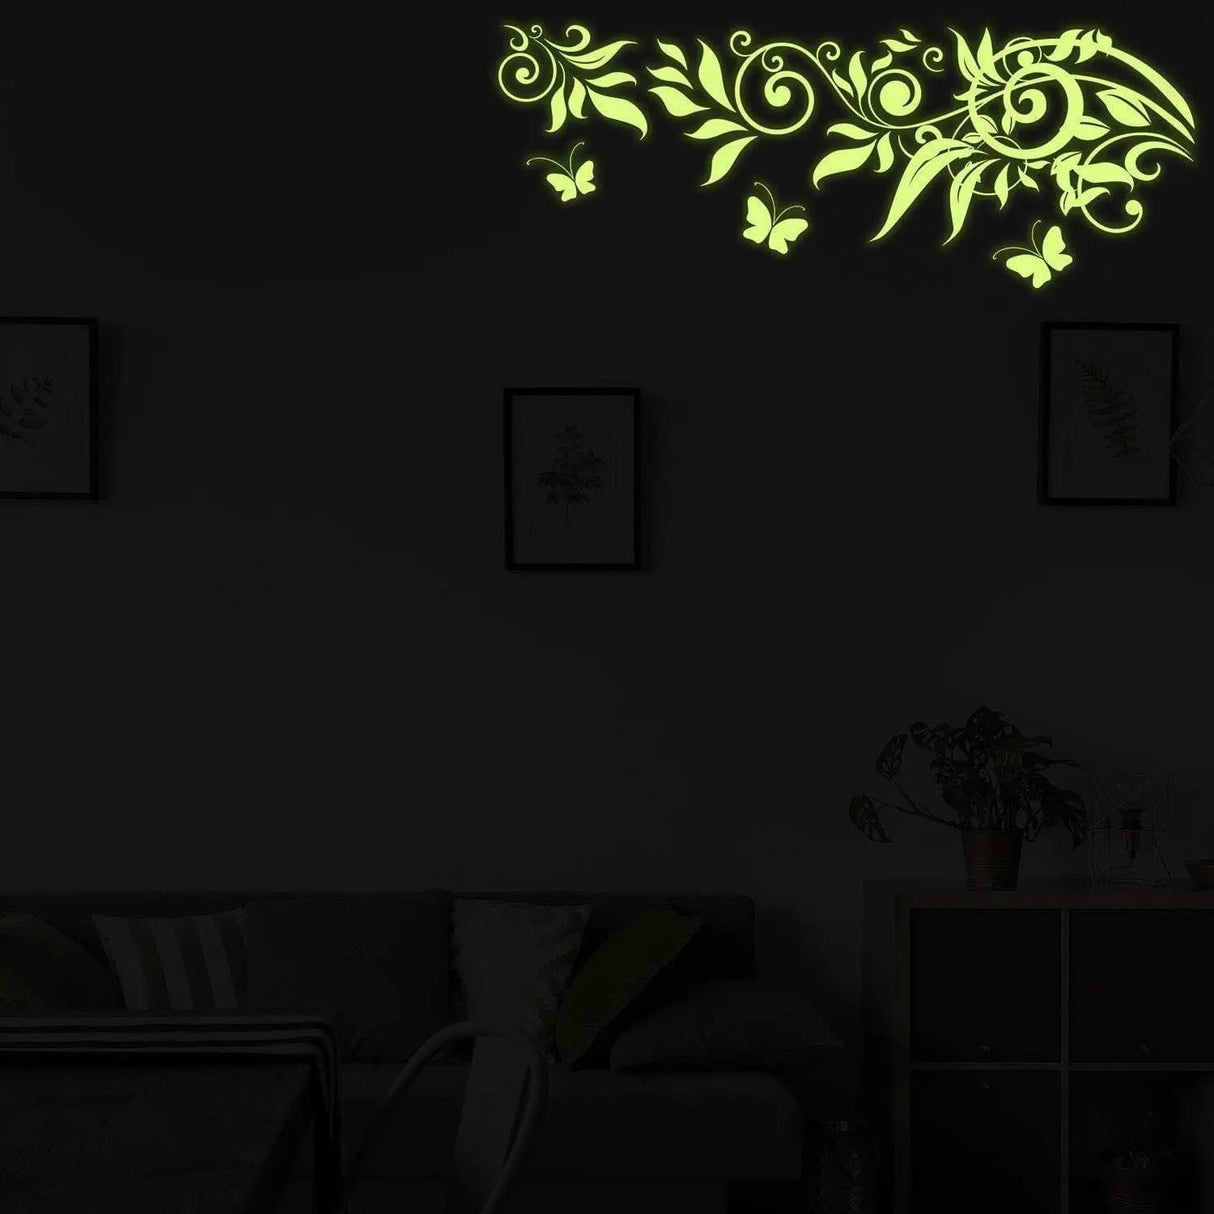 Glow At Night Decal Branch Wall Sticker - Glowing Vinyl In Dark Flower The Branches - Nature Spring Butterflies Flowery - Design Mural Art - Decords